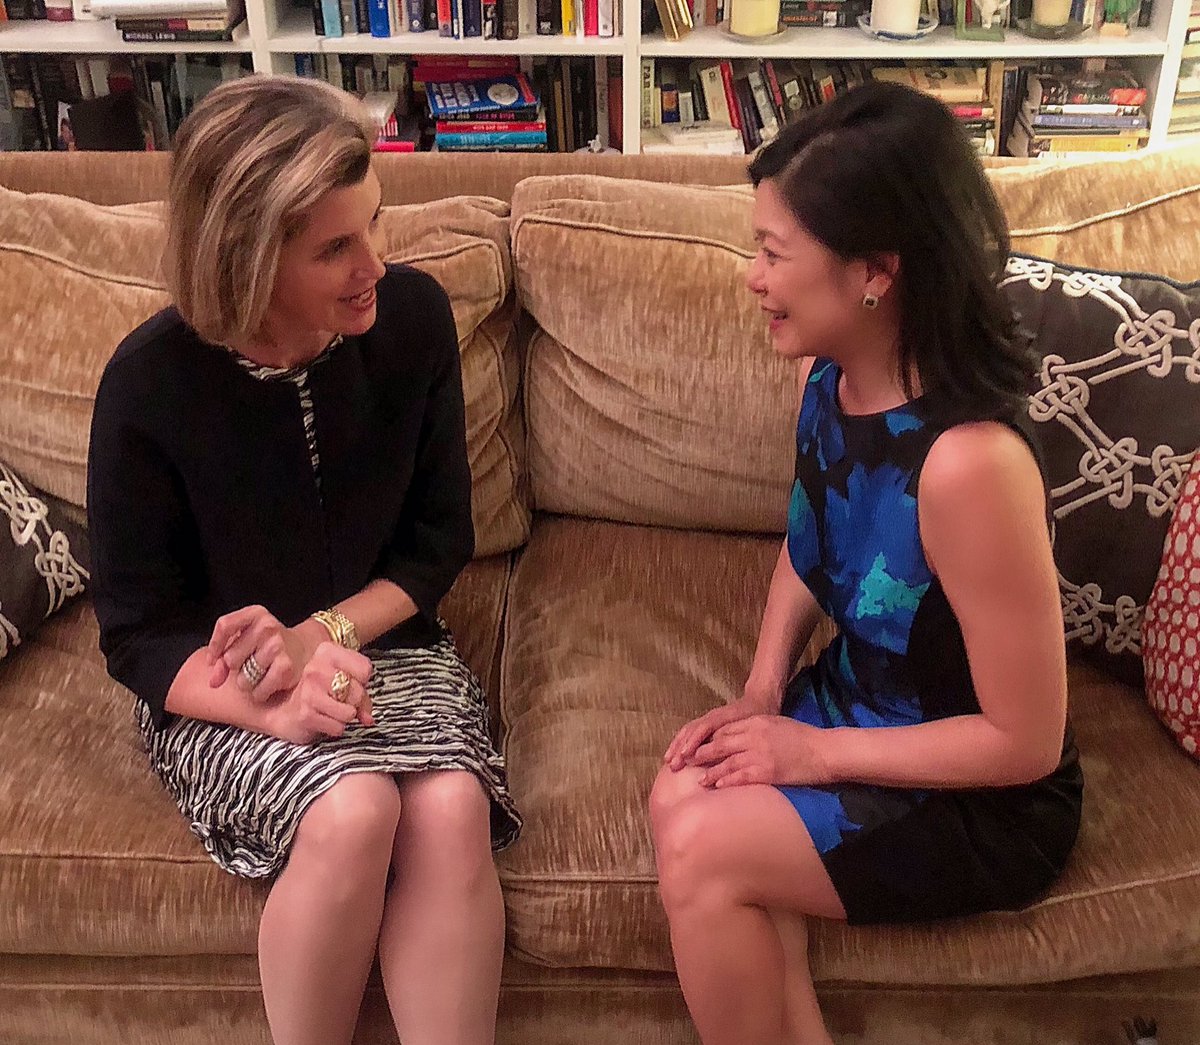 Sitting down with one of the most senior and recognizable women on Wall Street. @SallieKrawcheck headed wealth management for @MerrillLynch @BankofAmerica and @Citi. She’s now built an investing platform for women. My interview on @bloombergbaybiz at 4:47pm today - 106.1 Boston